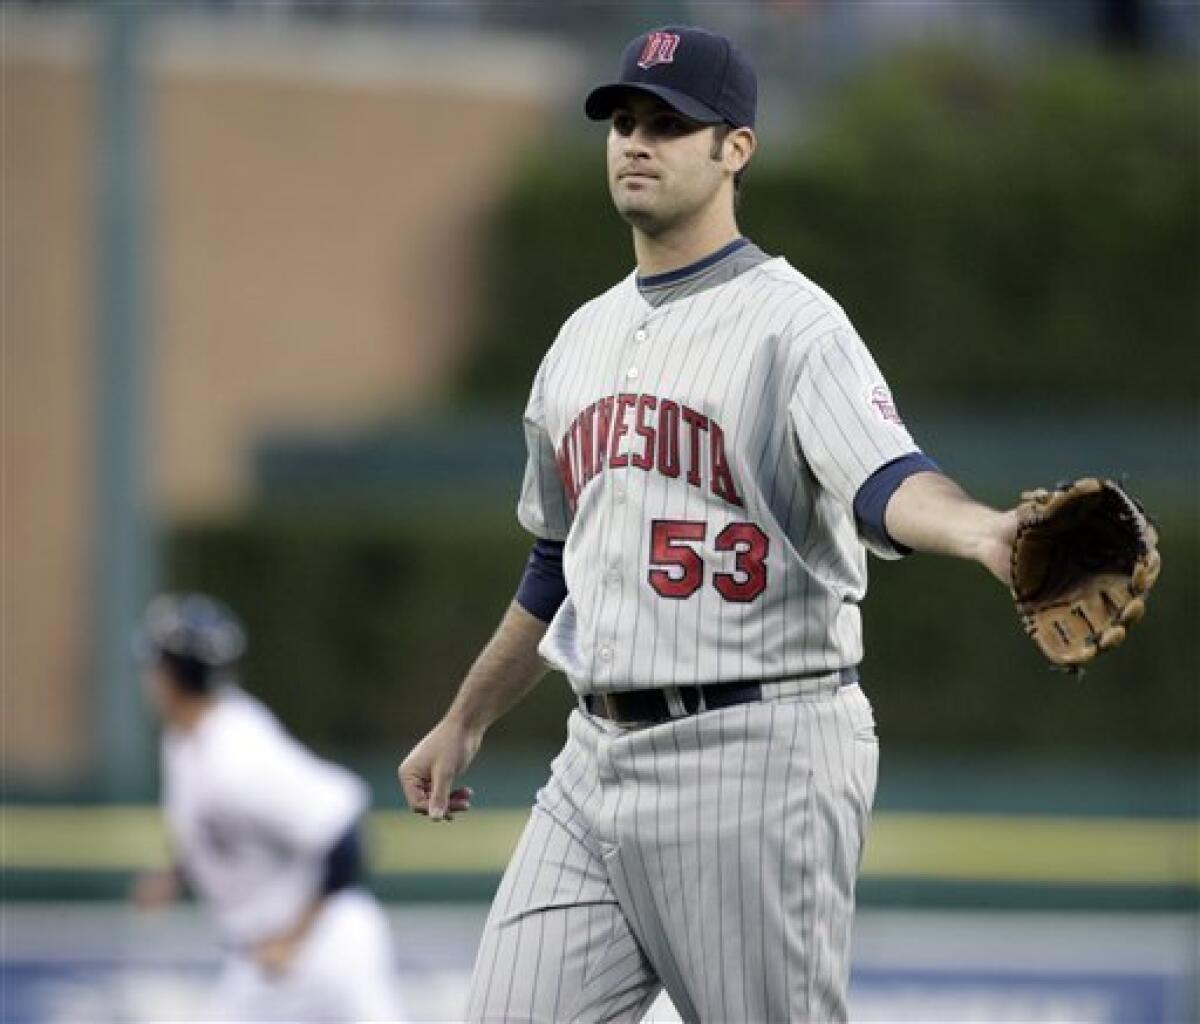 Minnesota Twins starter Nick Blackburn (53) reacts after giving up a two-run home run to Detroit Tigers' Miguel Cabrera, left, in the fourth inning of a baseball game on Tuesday, May 5, 2009 in Detroit. (AP Photo/Duane Burleson)